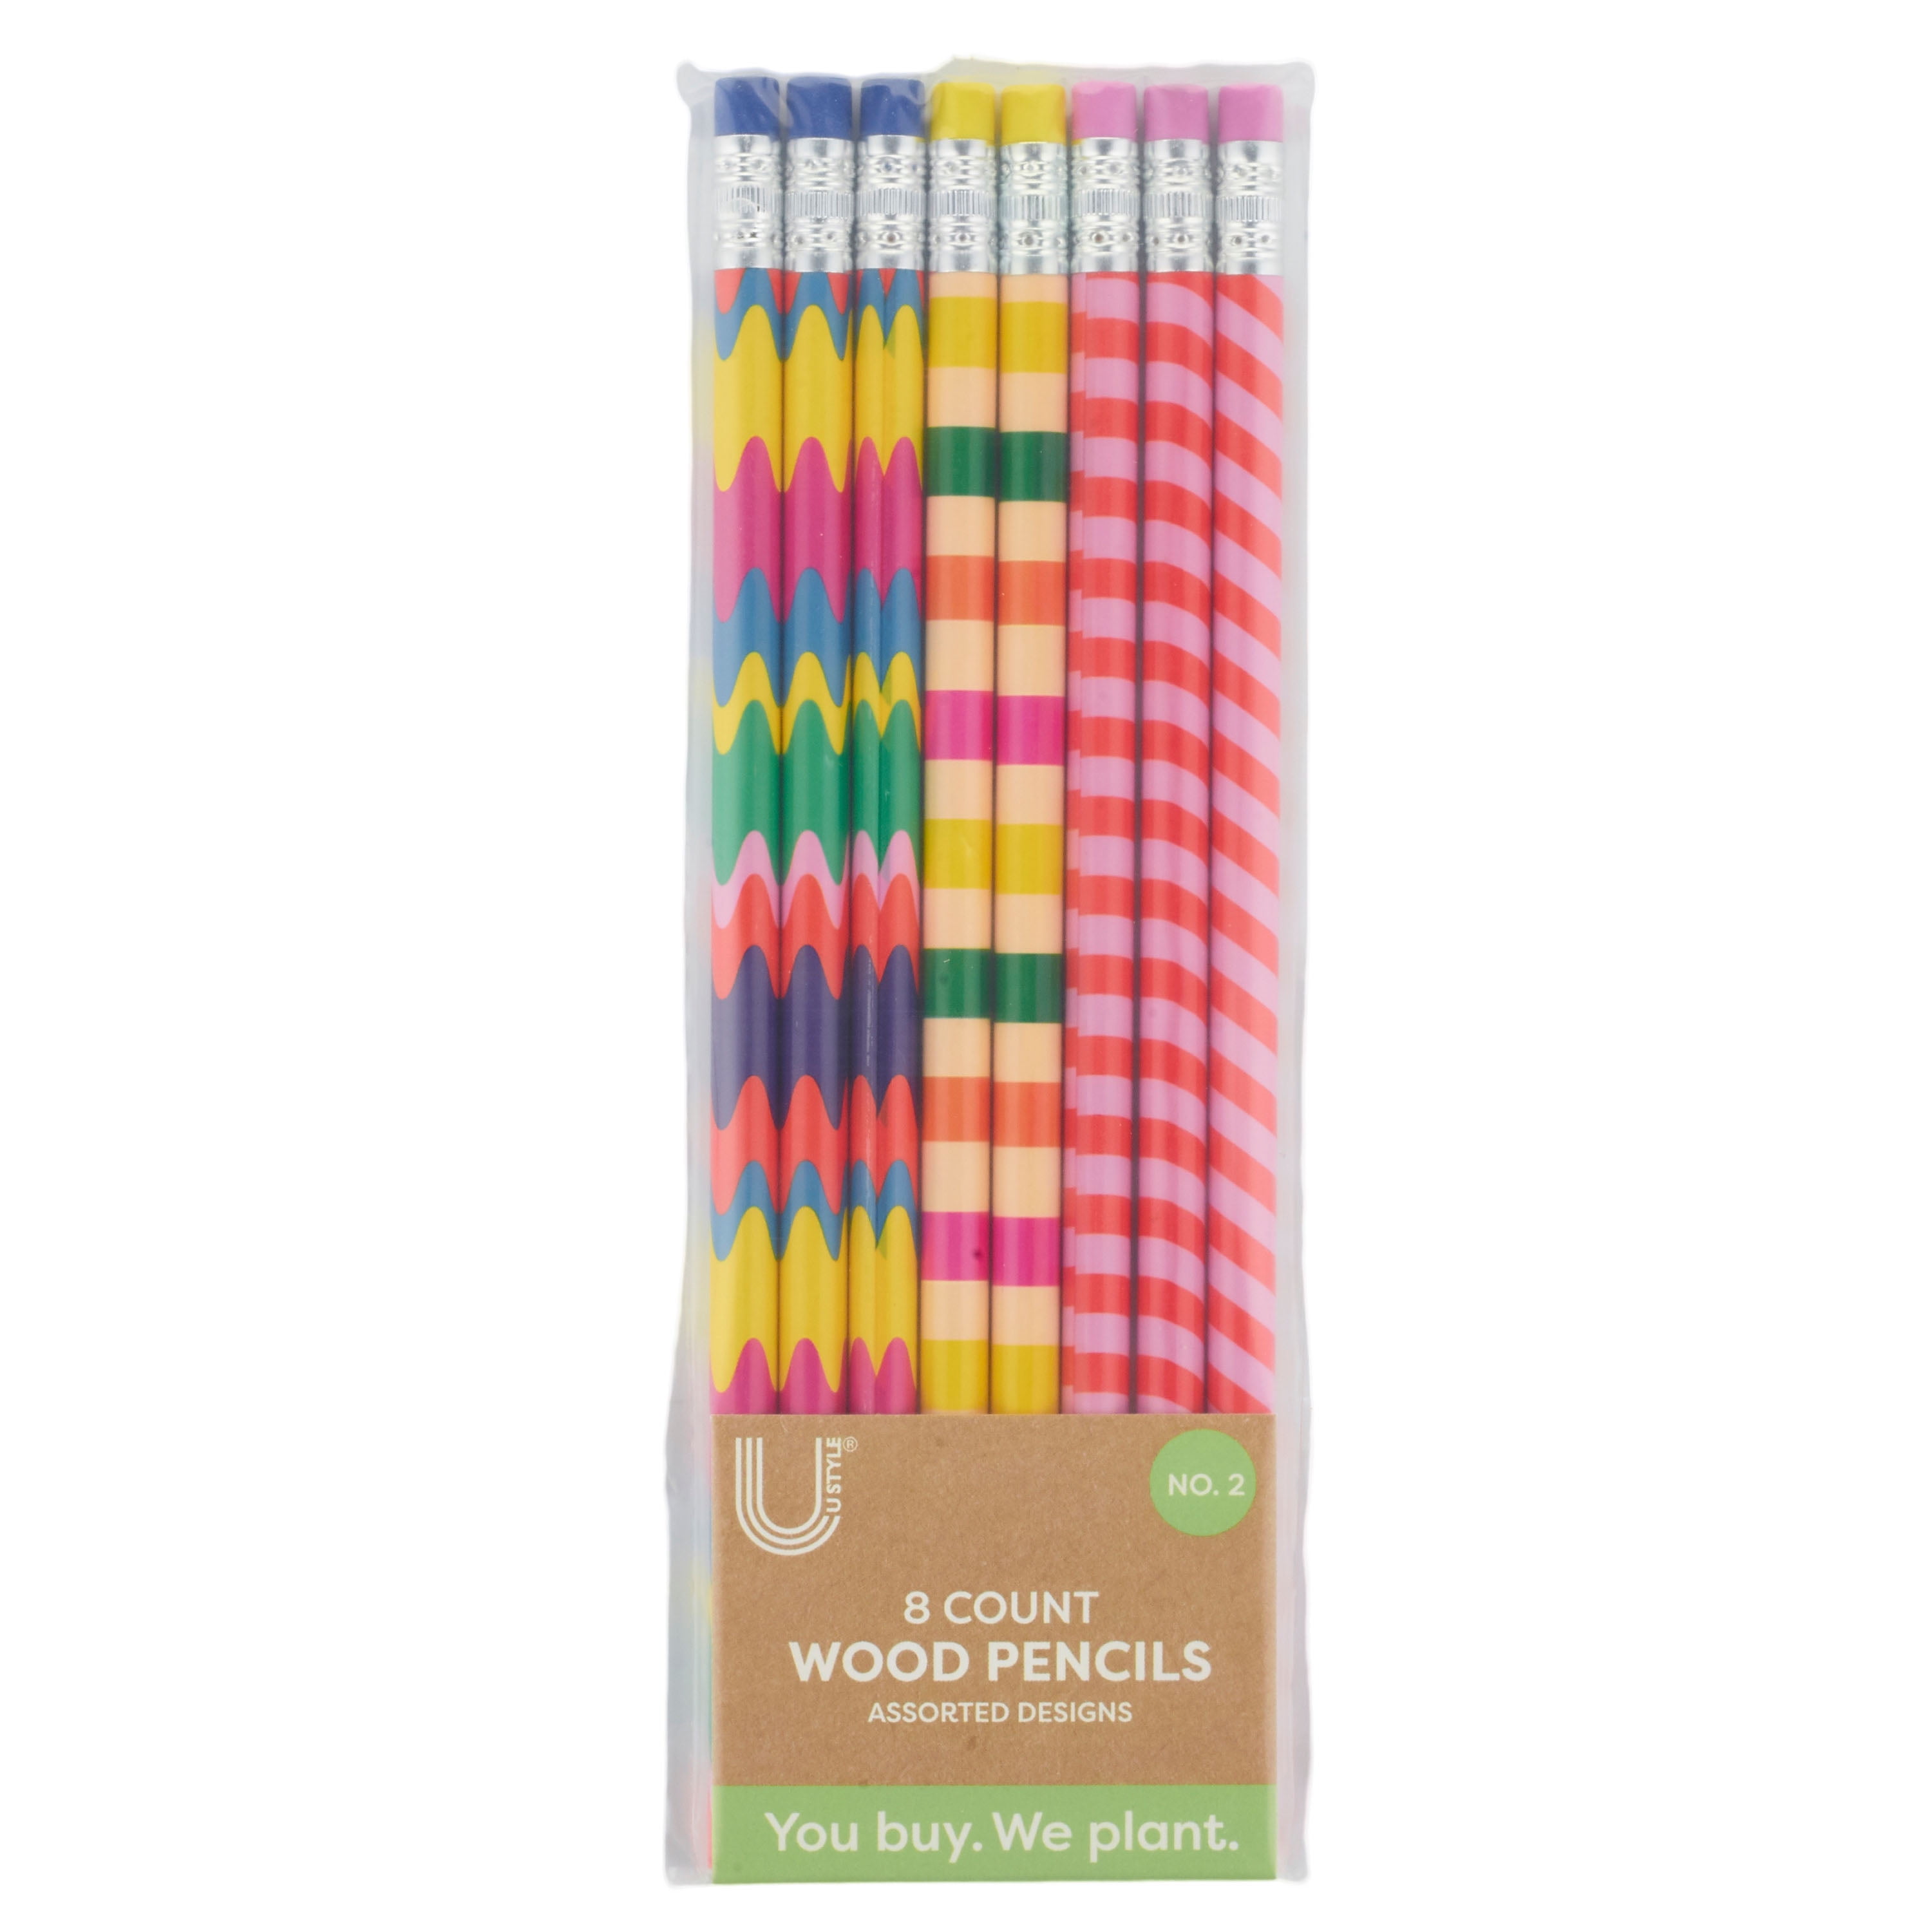 U Style No. 2 Wood Pencils, Bright Mess-Proof Glitter, 8 Count